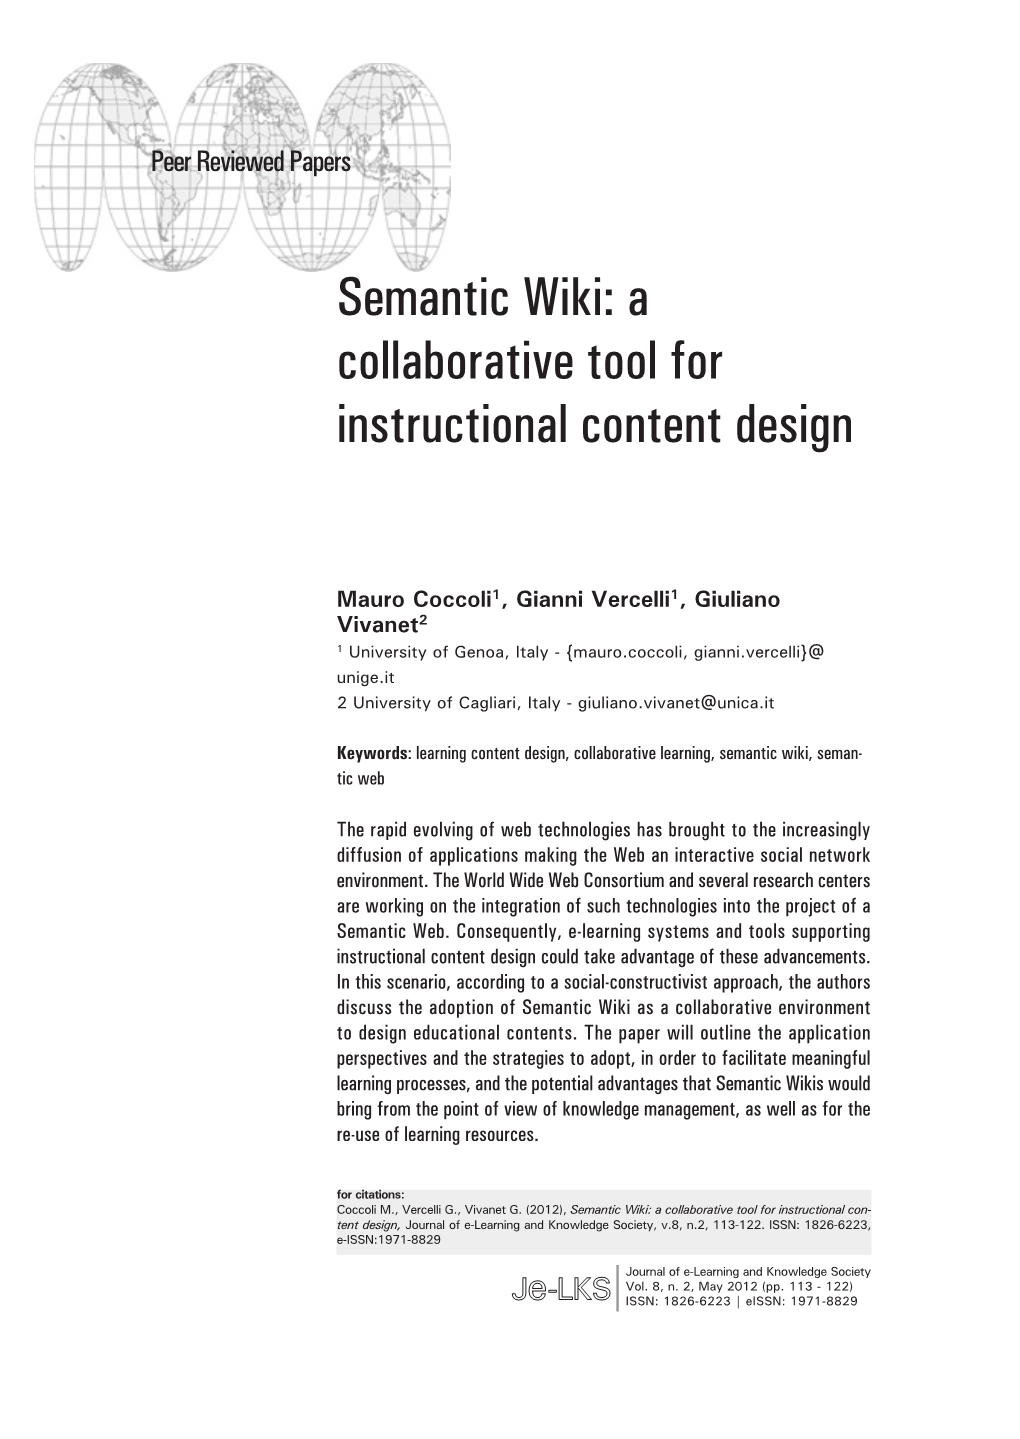 Semantic Wiki: a Collaborative Tool for Instructional Content Design